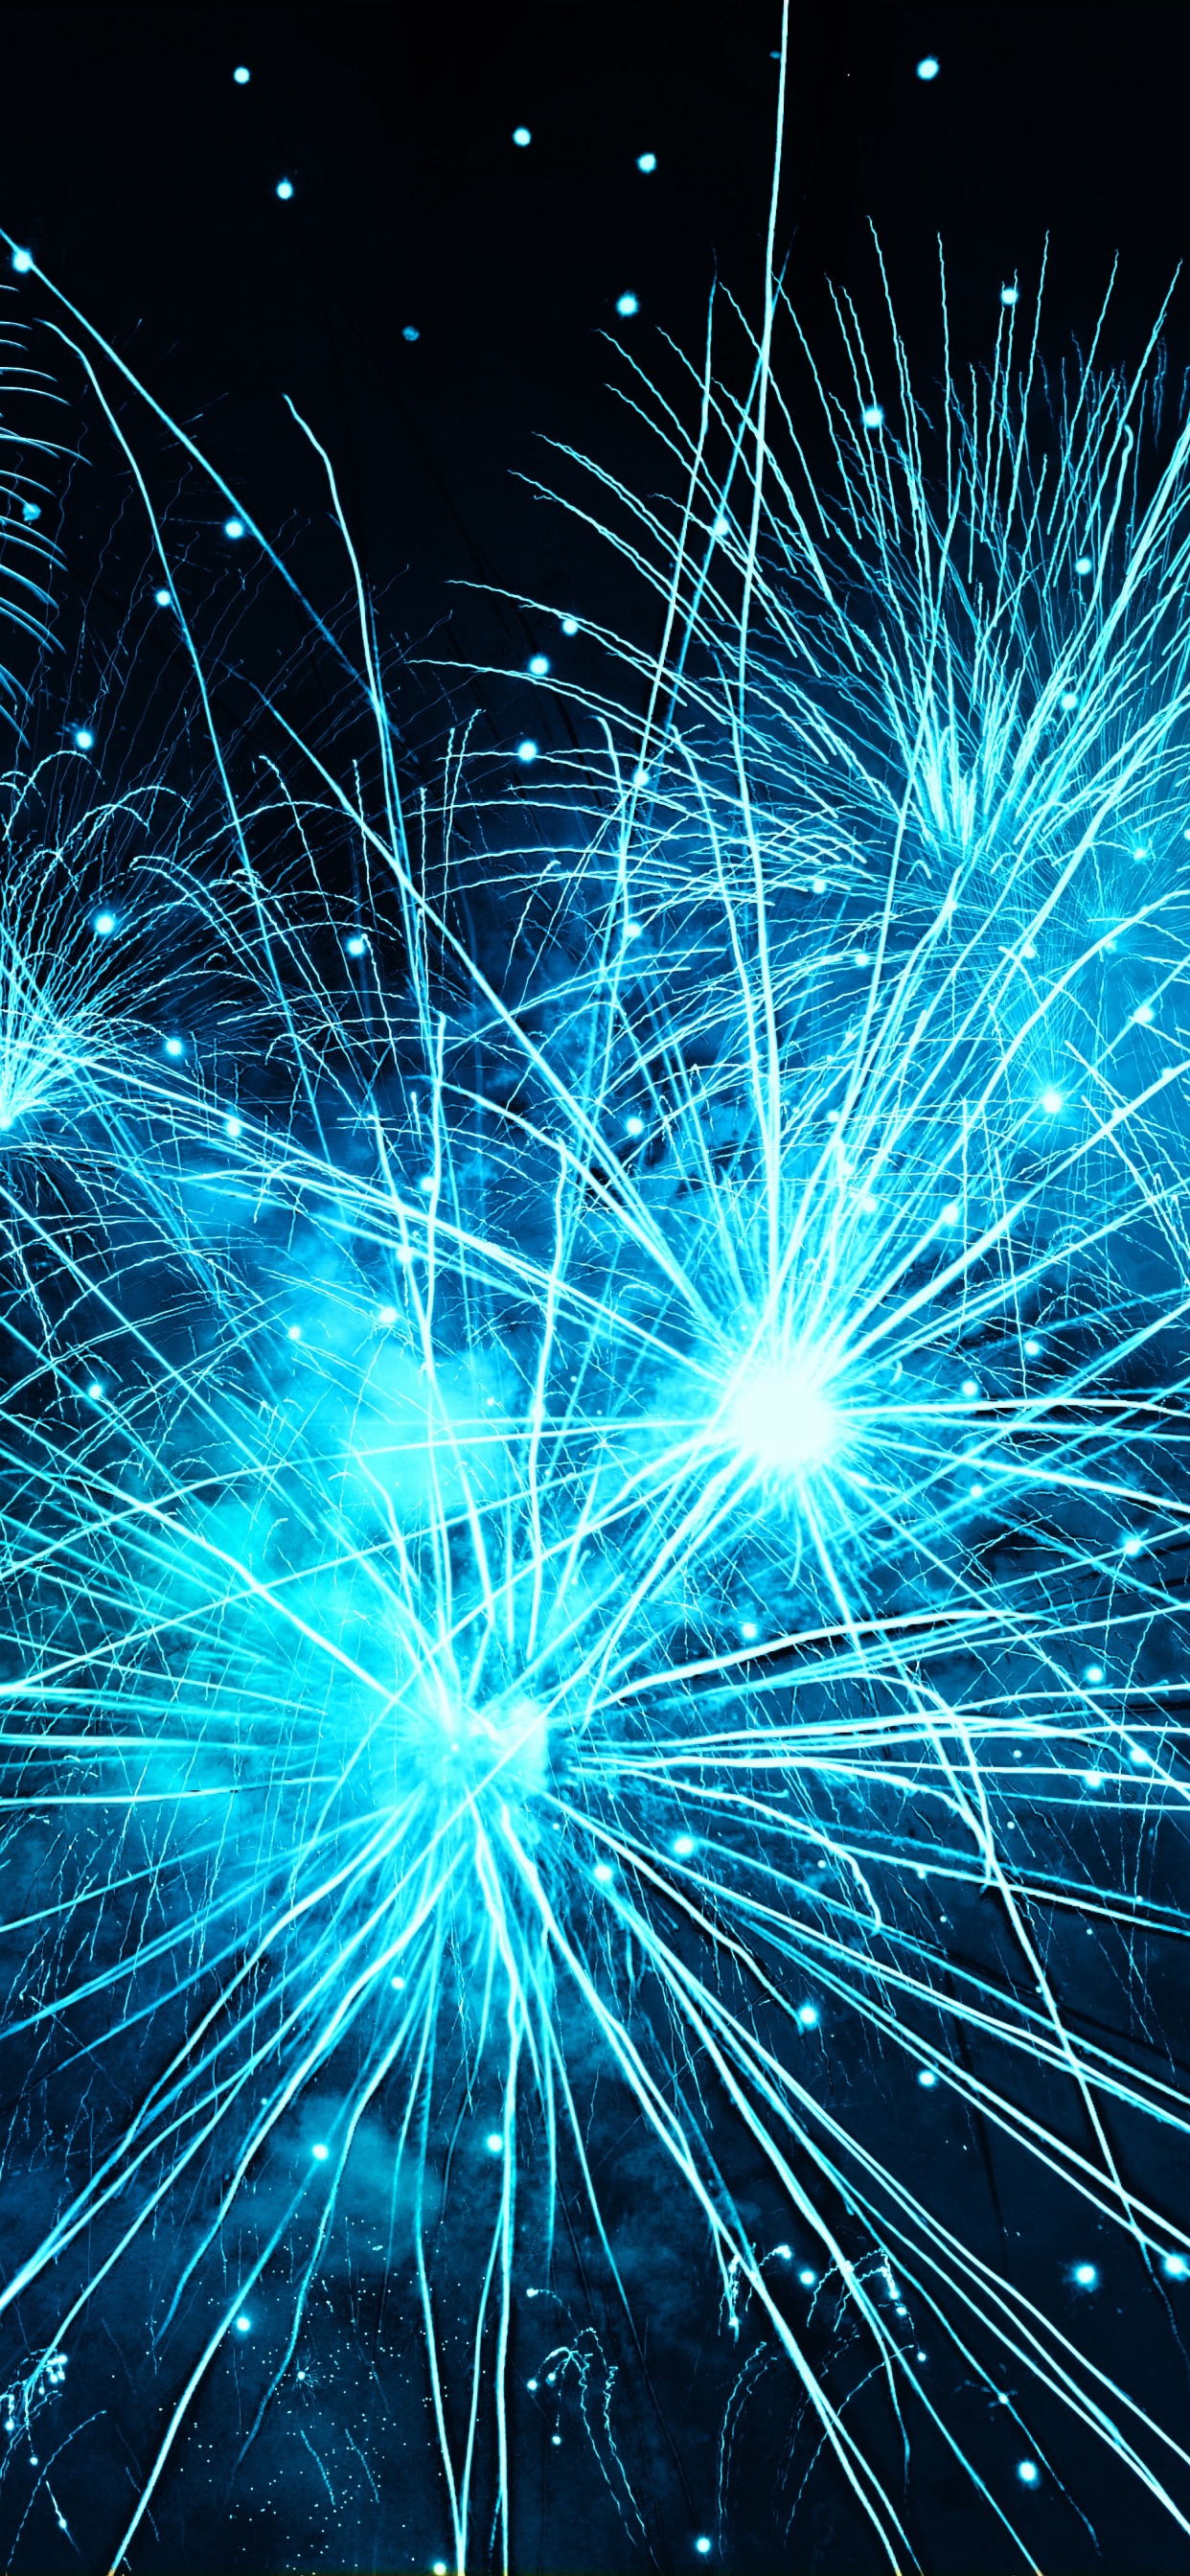 New Years Eve, New Year, New Years Day, Party, Fireworks. Wallpaper in 1242x2688 Resolution